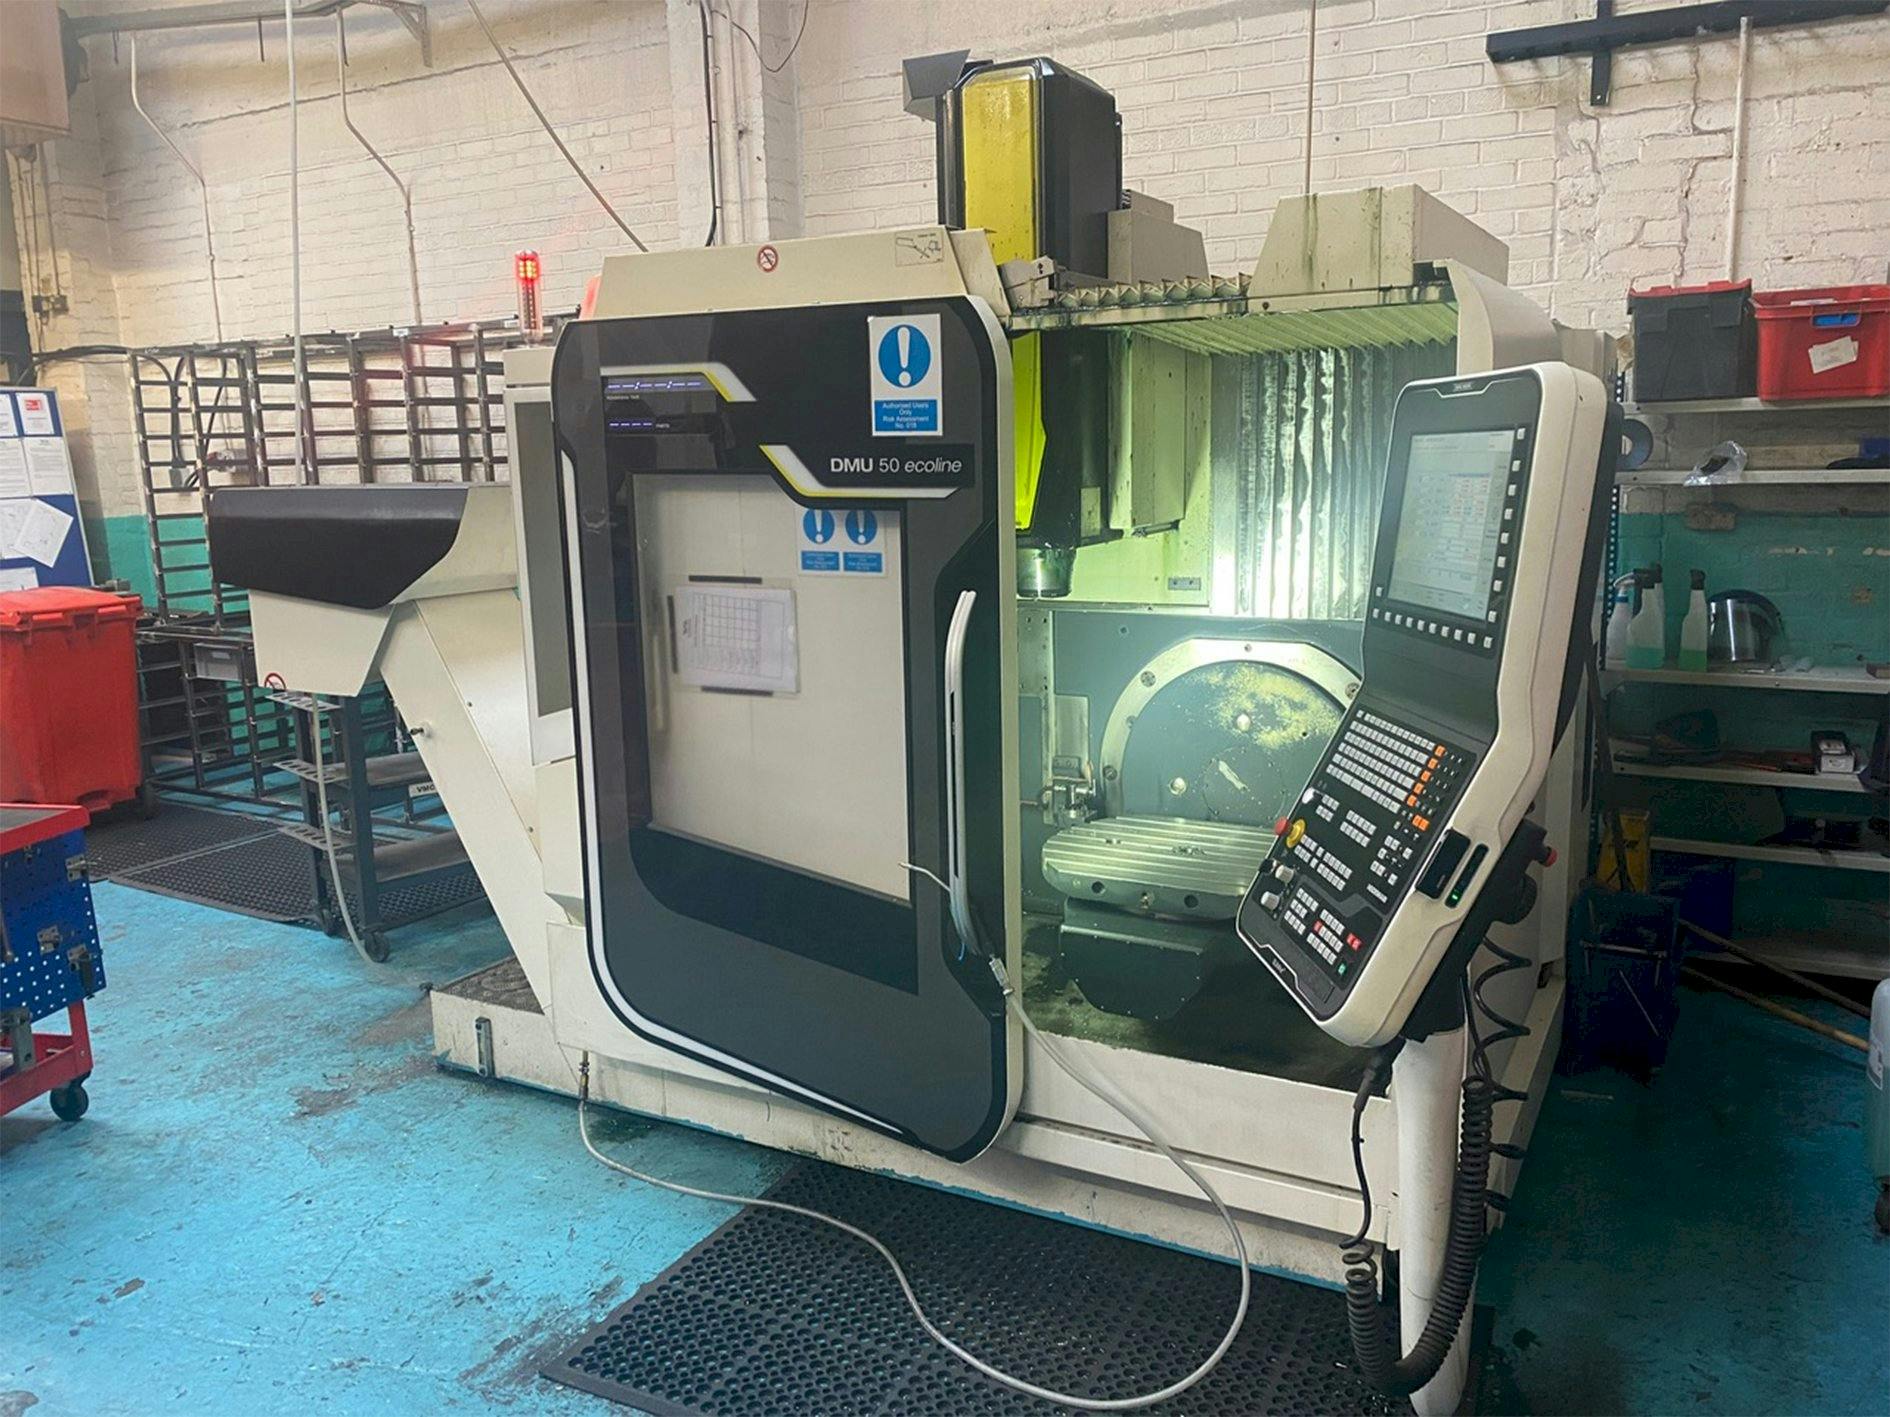 Front view of DMG DMU Ecoline 50 5 Axis VMC  machine